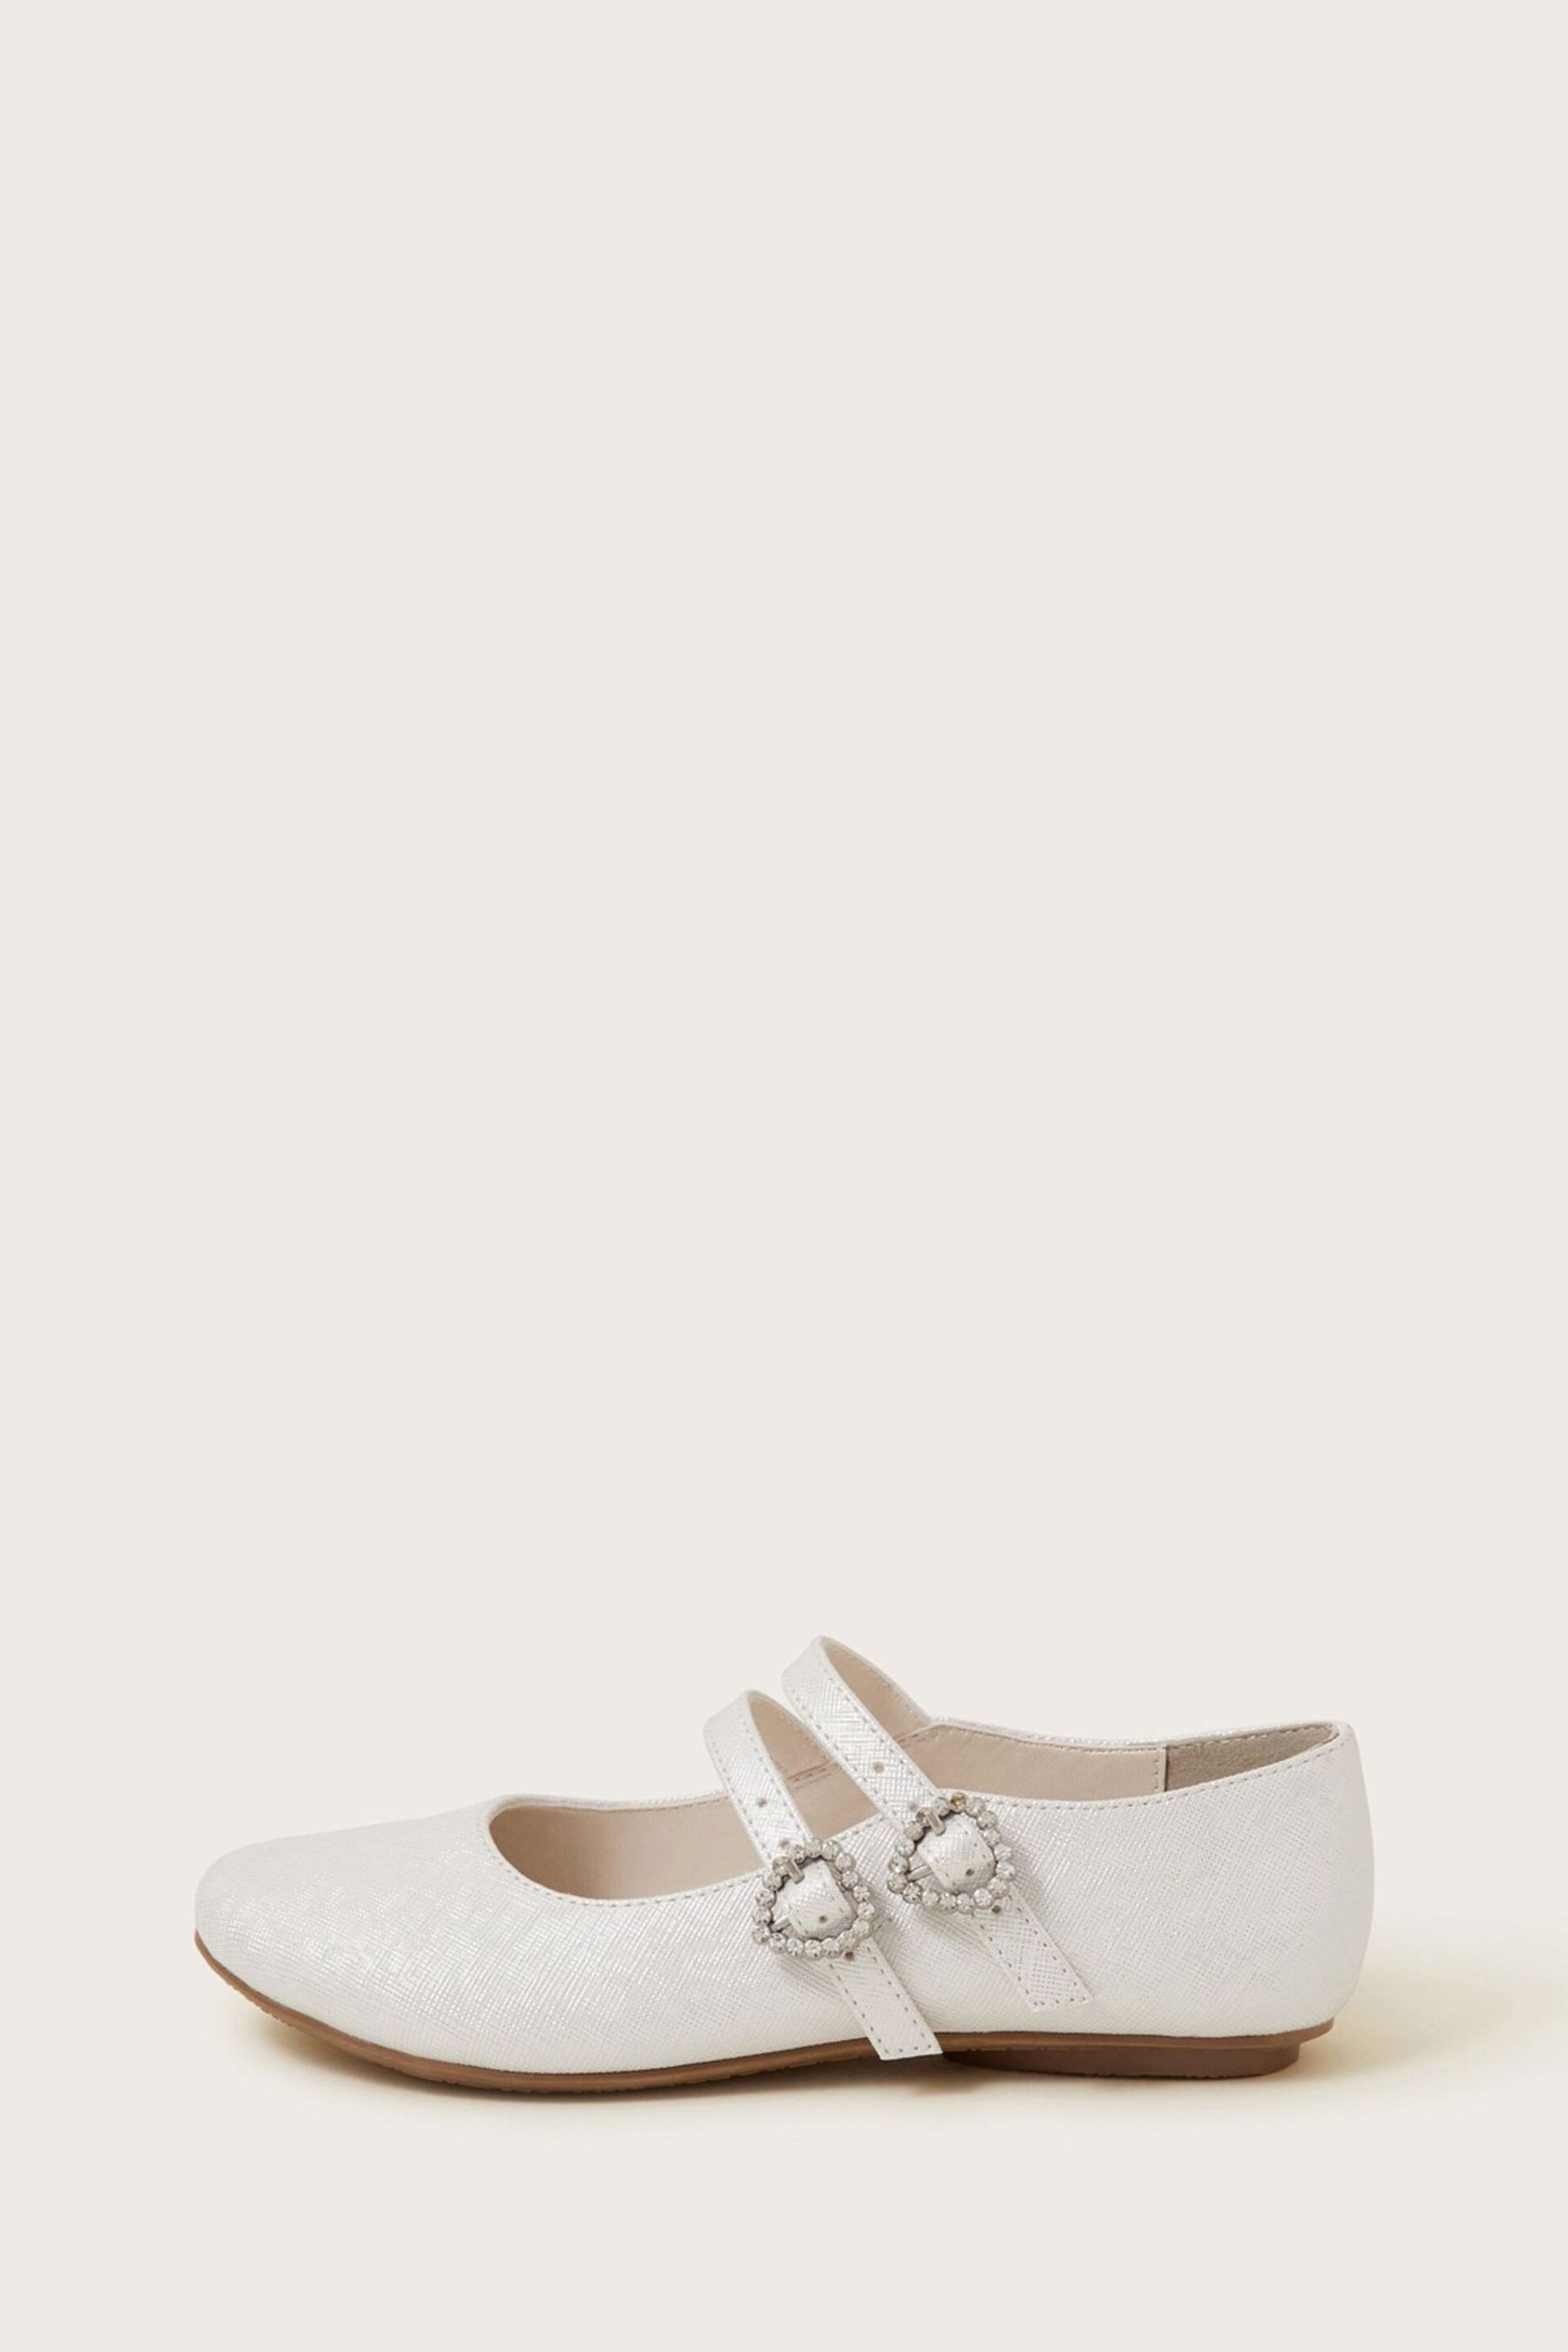 Monsoon Silver Sparkle Two Strap Ballerina Flats - Image 2 of 3